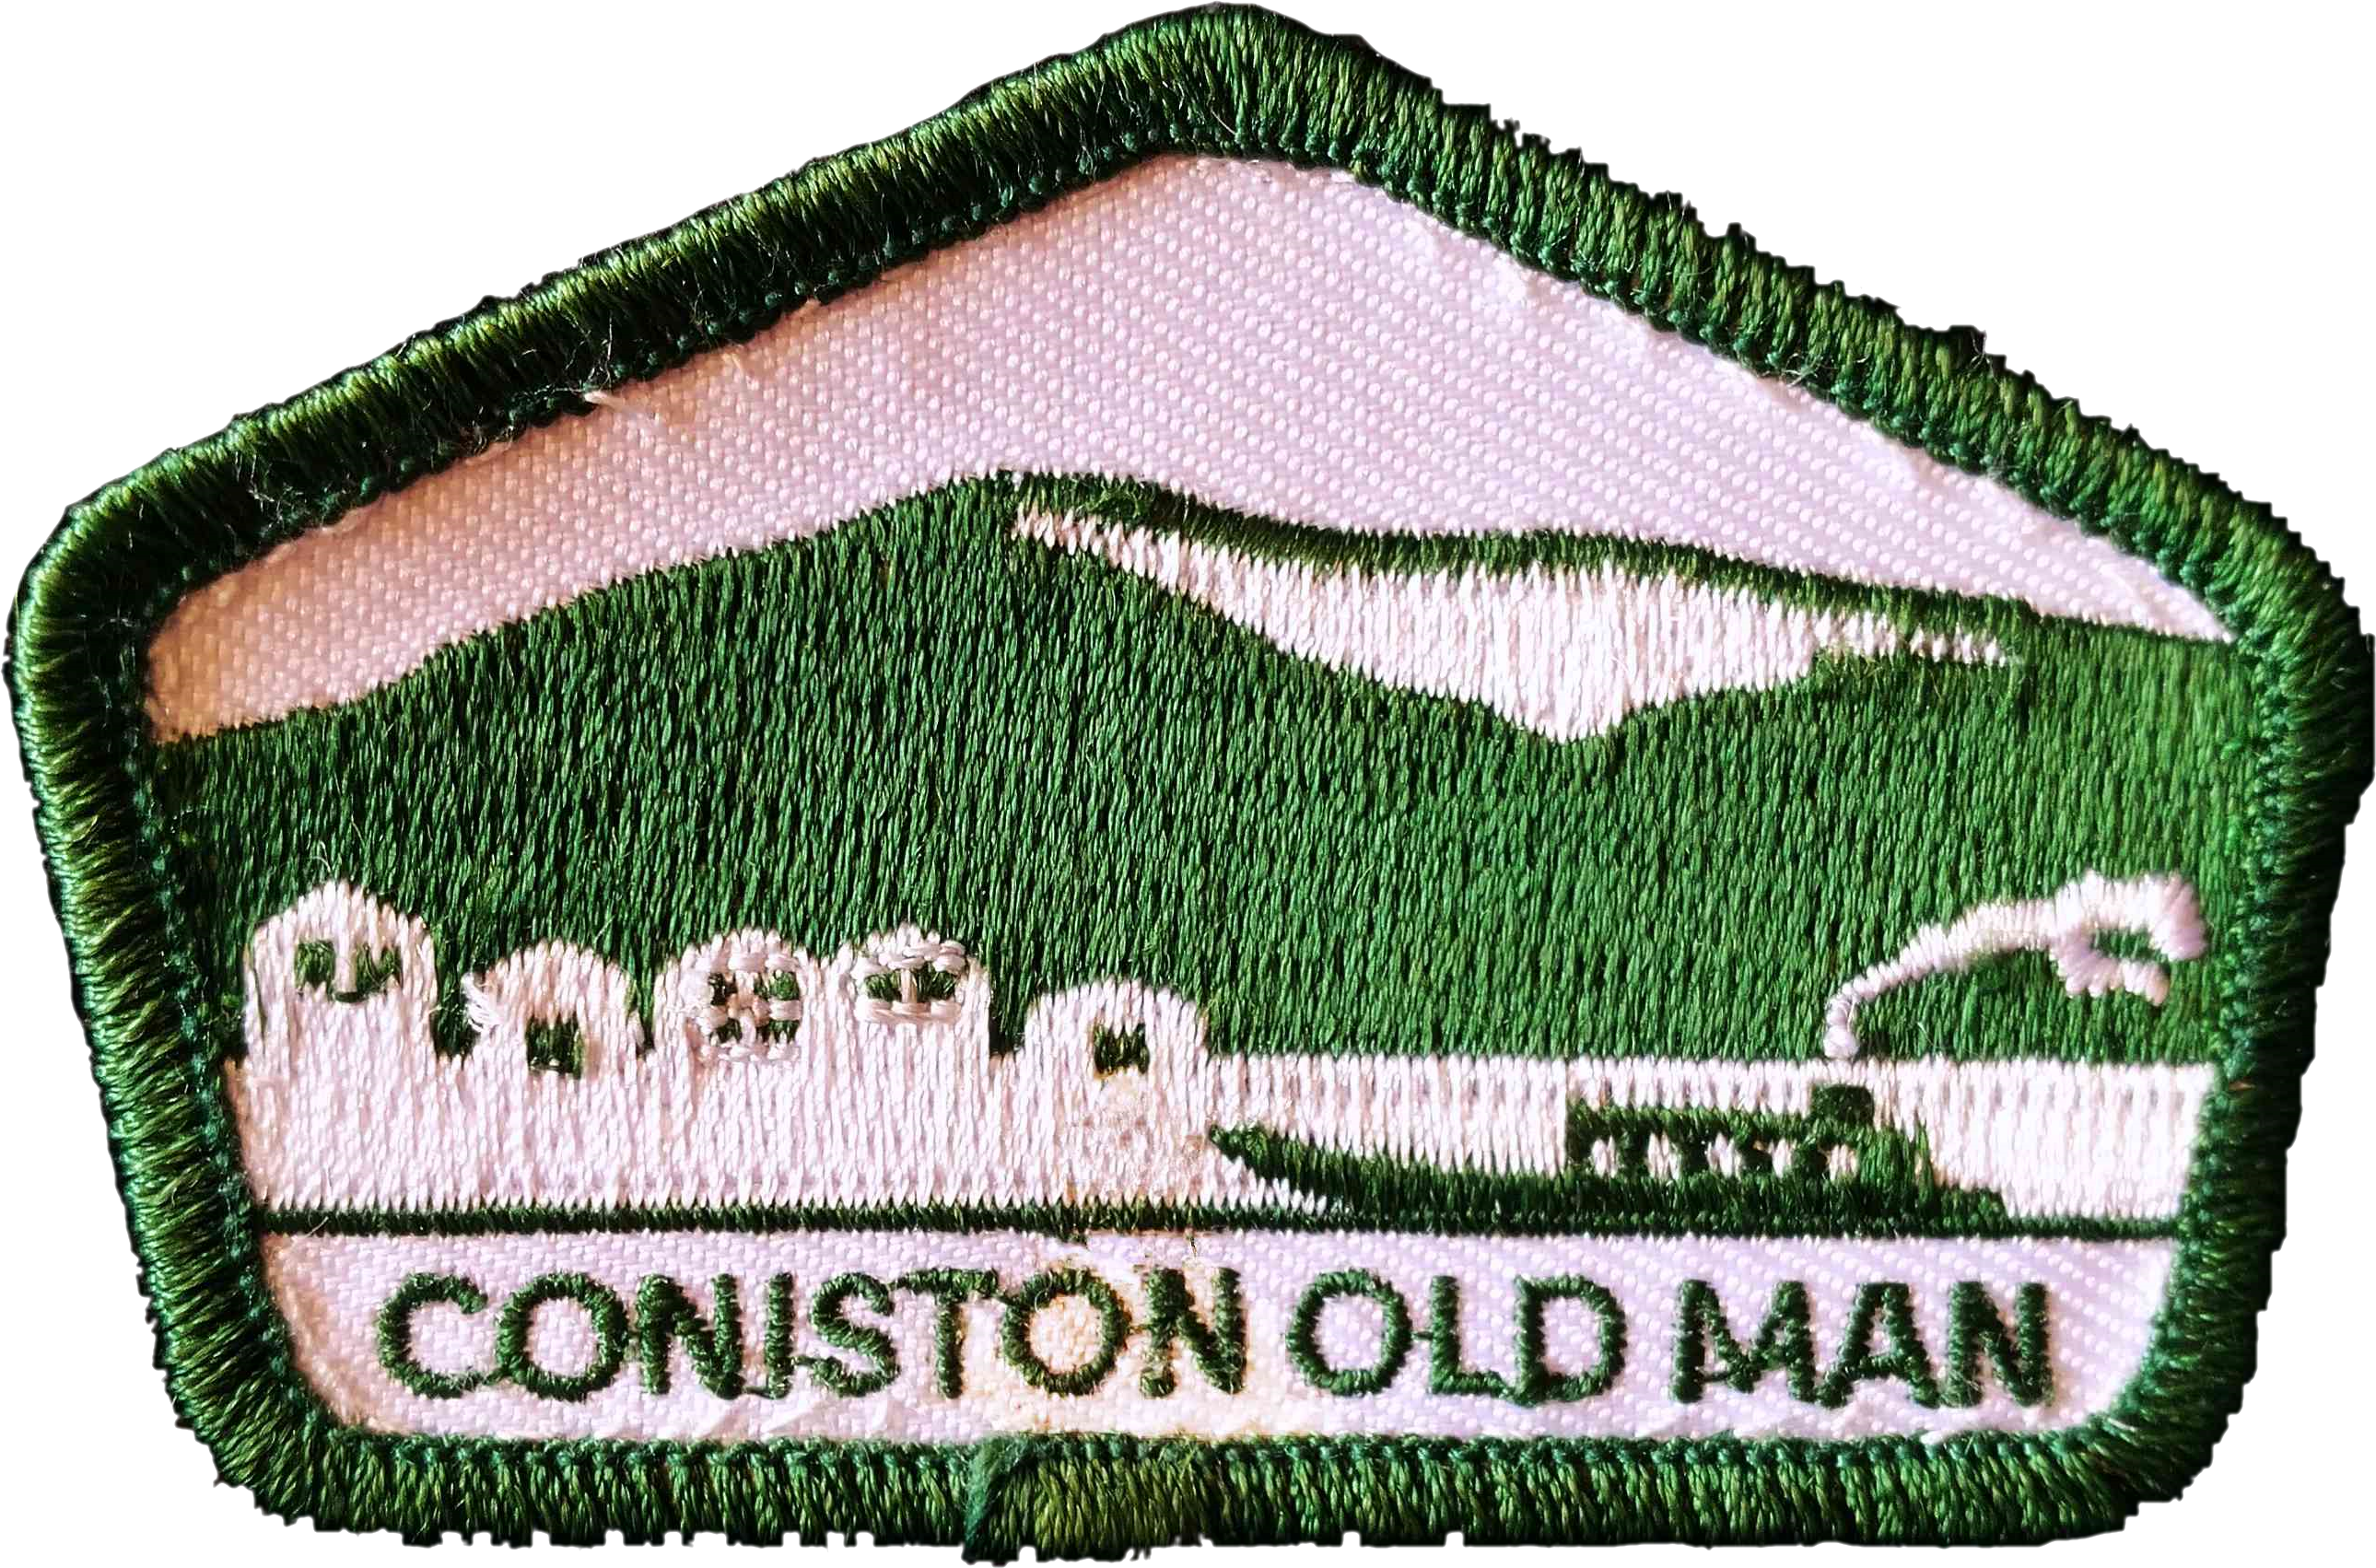 A green and white patch of a scene of a fell labled as 'Coniston Old Man'